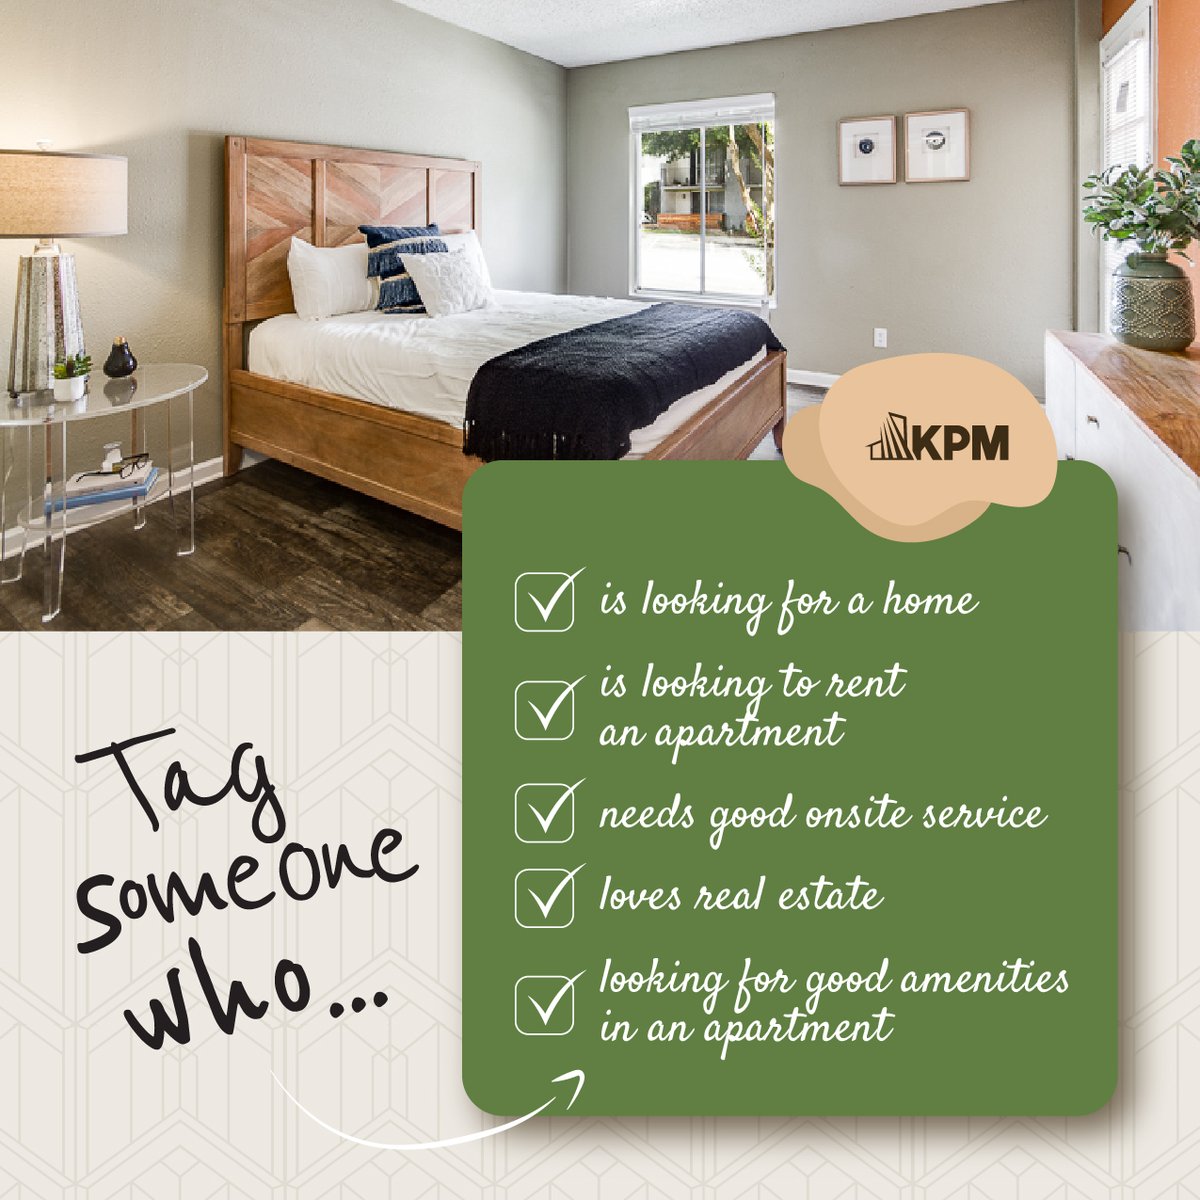 Searching for a place to call home? Look no further! Tag someone who's on the hunt for their dream home.  

#ApartmentLiving #KPMPropertyManagement #Apartment #Home #BudgetFriendly #DreamHome #Renting #Spacious #Lifestyle #Amenities #ApartmentAmenities #tag #Tagsomeone